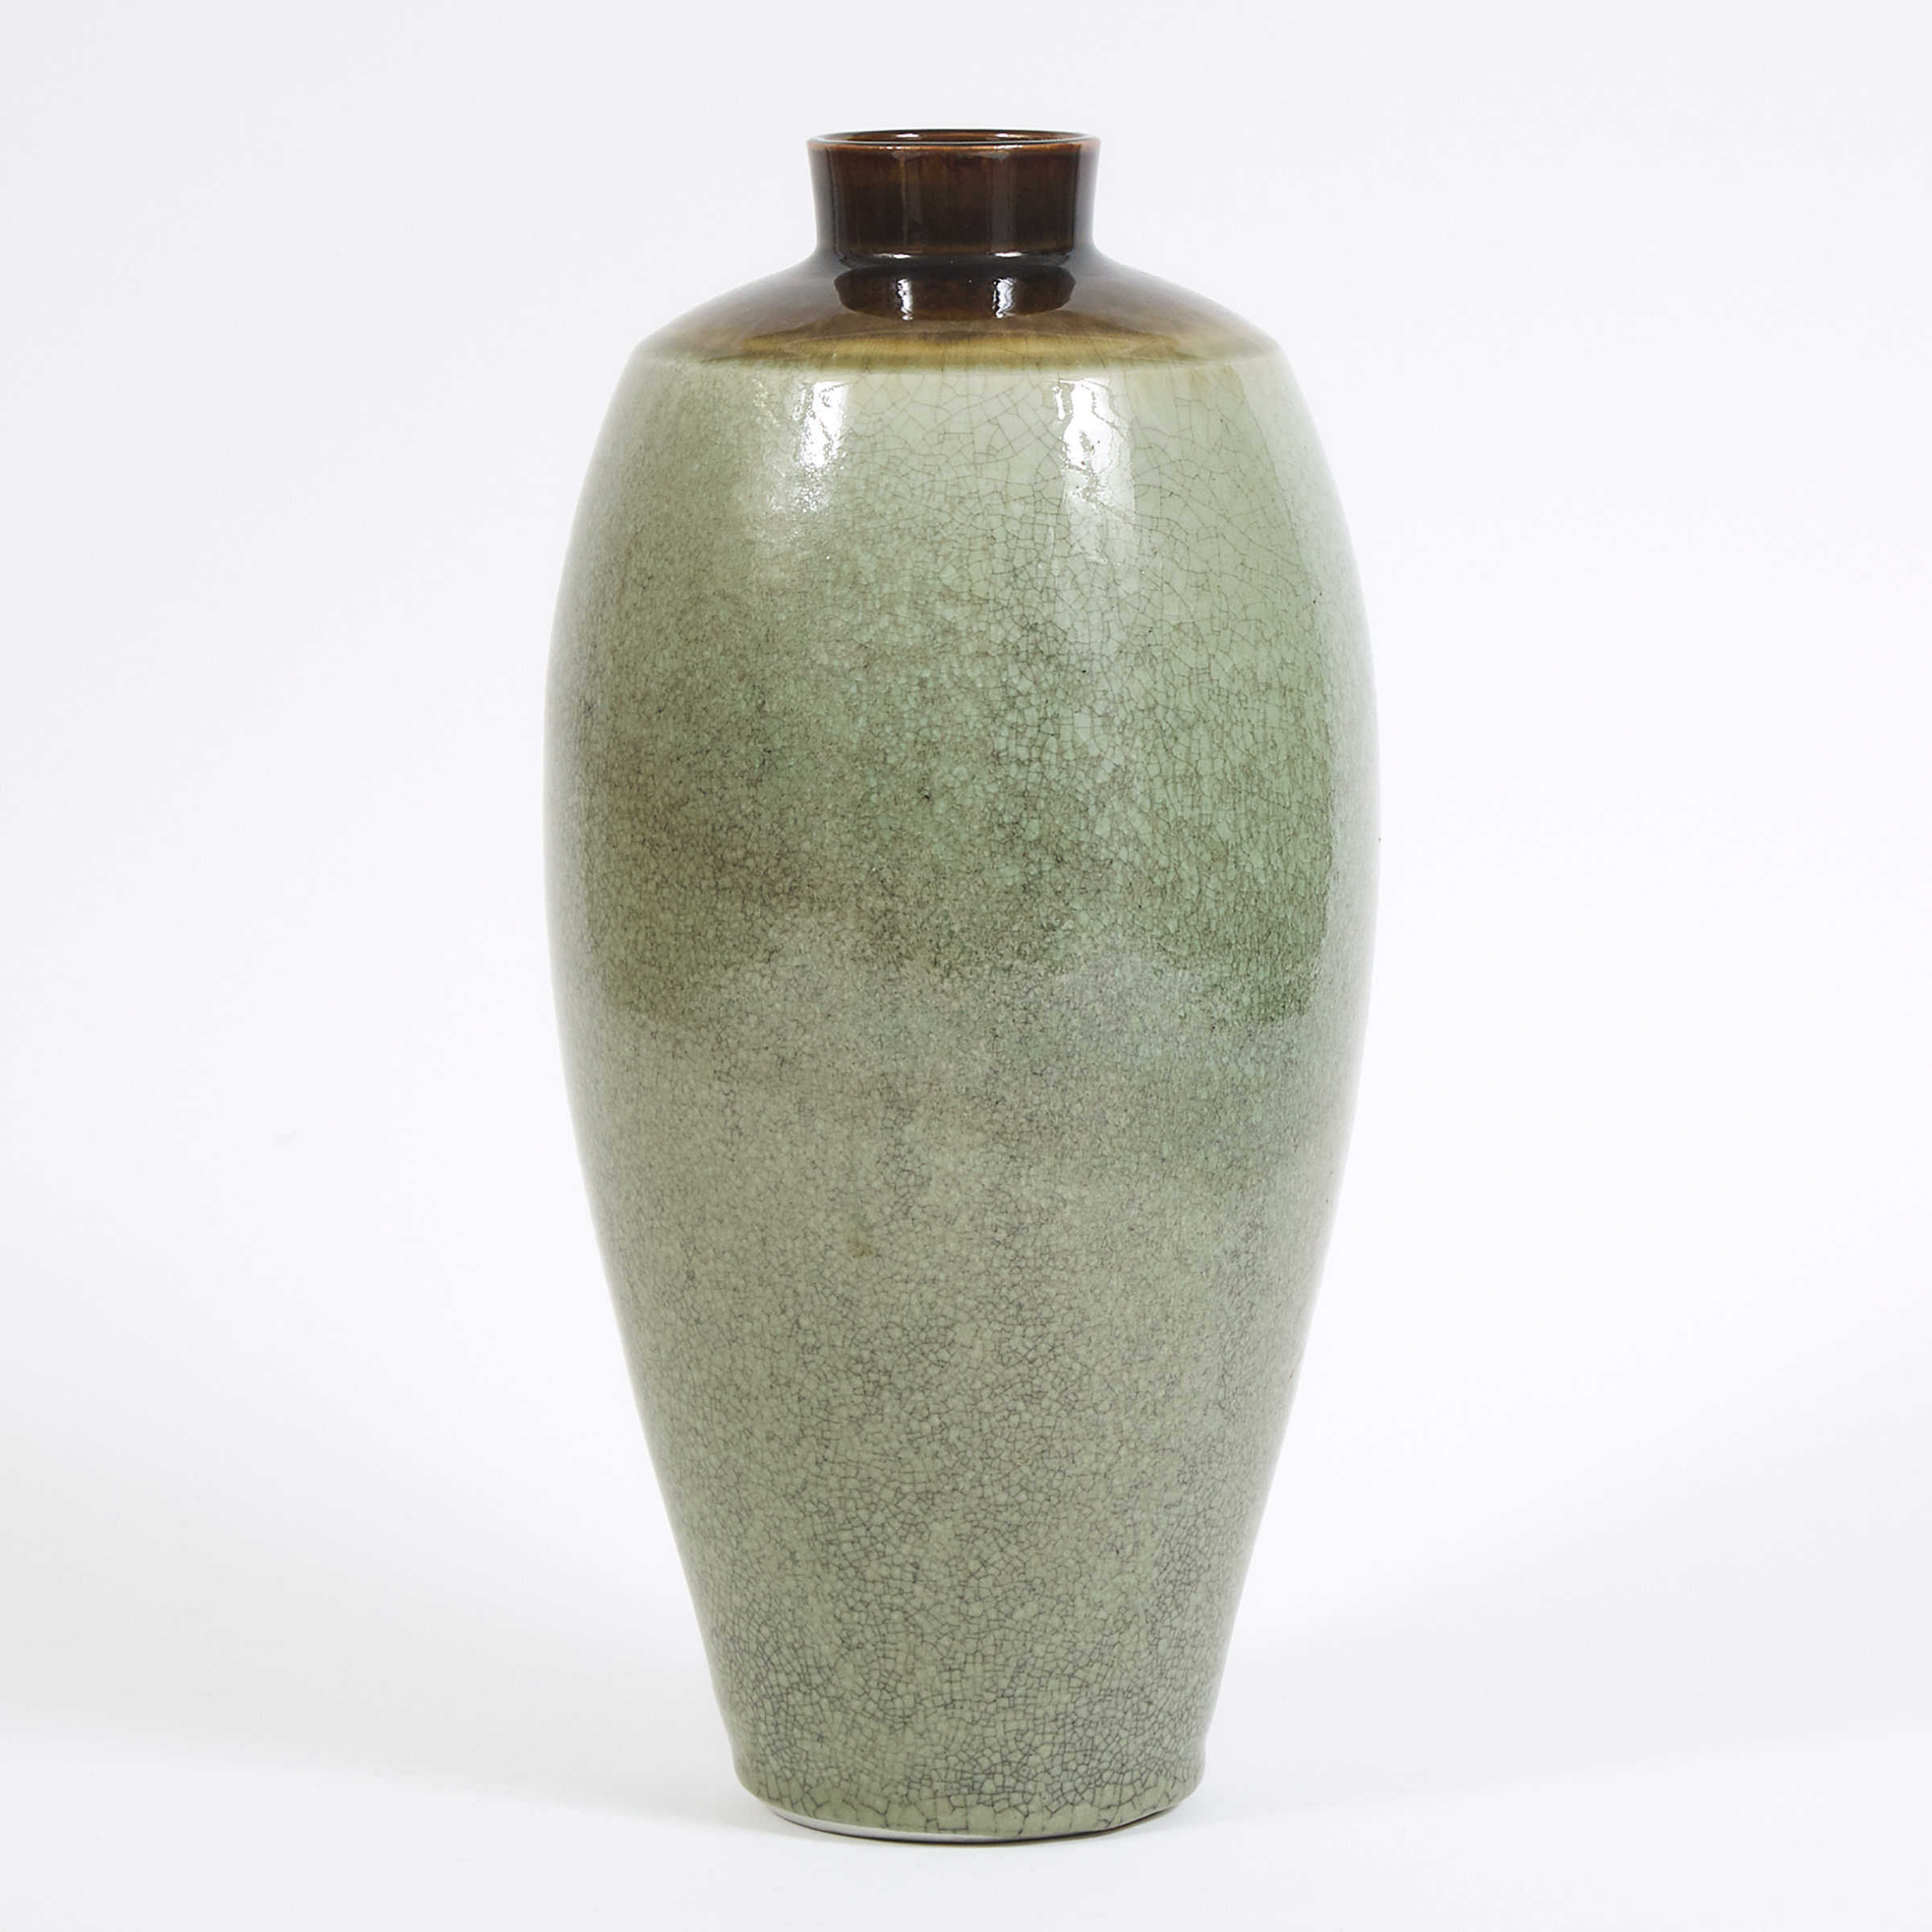 Harlan House (Canadian, b.1943), Brown and Grey Crackle Glazed Vase, 1993